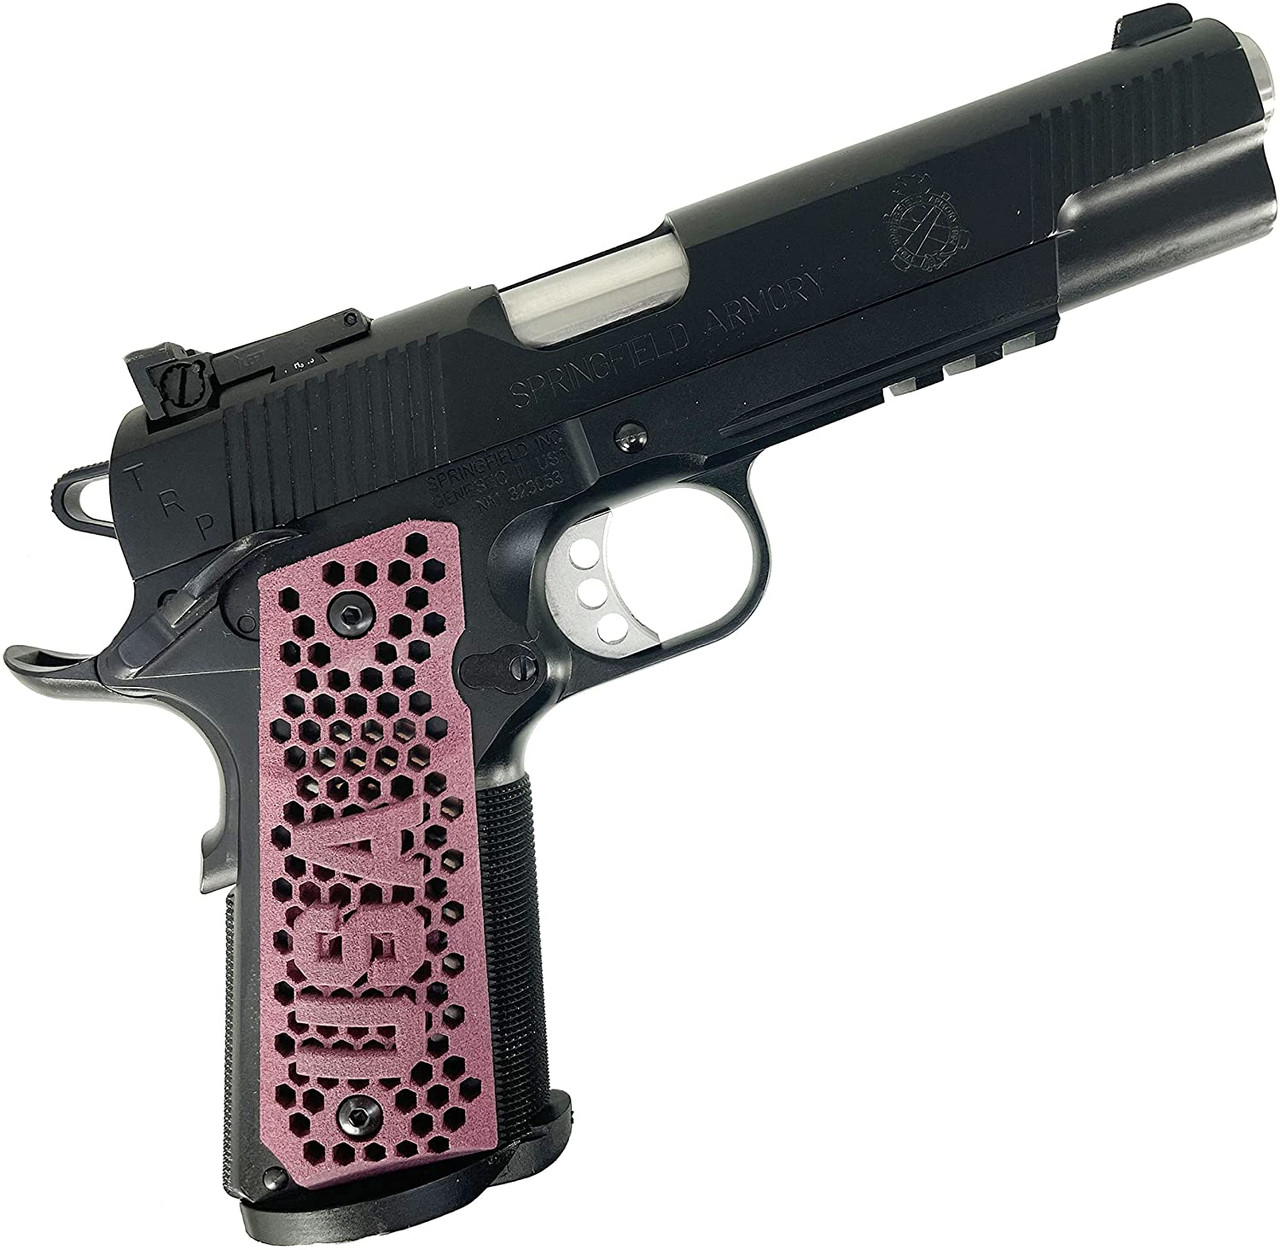 Garrison Grip All New 1911 "USA" Ultimate Ambi Grips Fit Colt A1 & Commander. Also Fits Clones. Tactical Grade Polymer with Micro-Sand Finish for Superior Handling Tactical Pink (Grips and Screw Set Only)